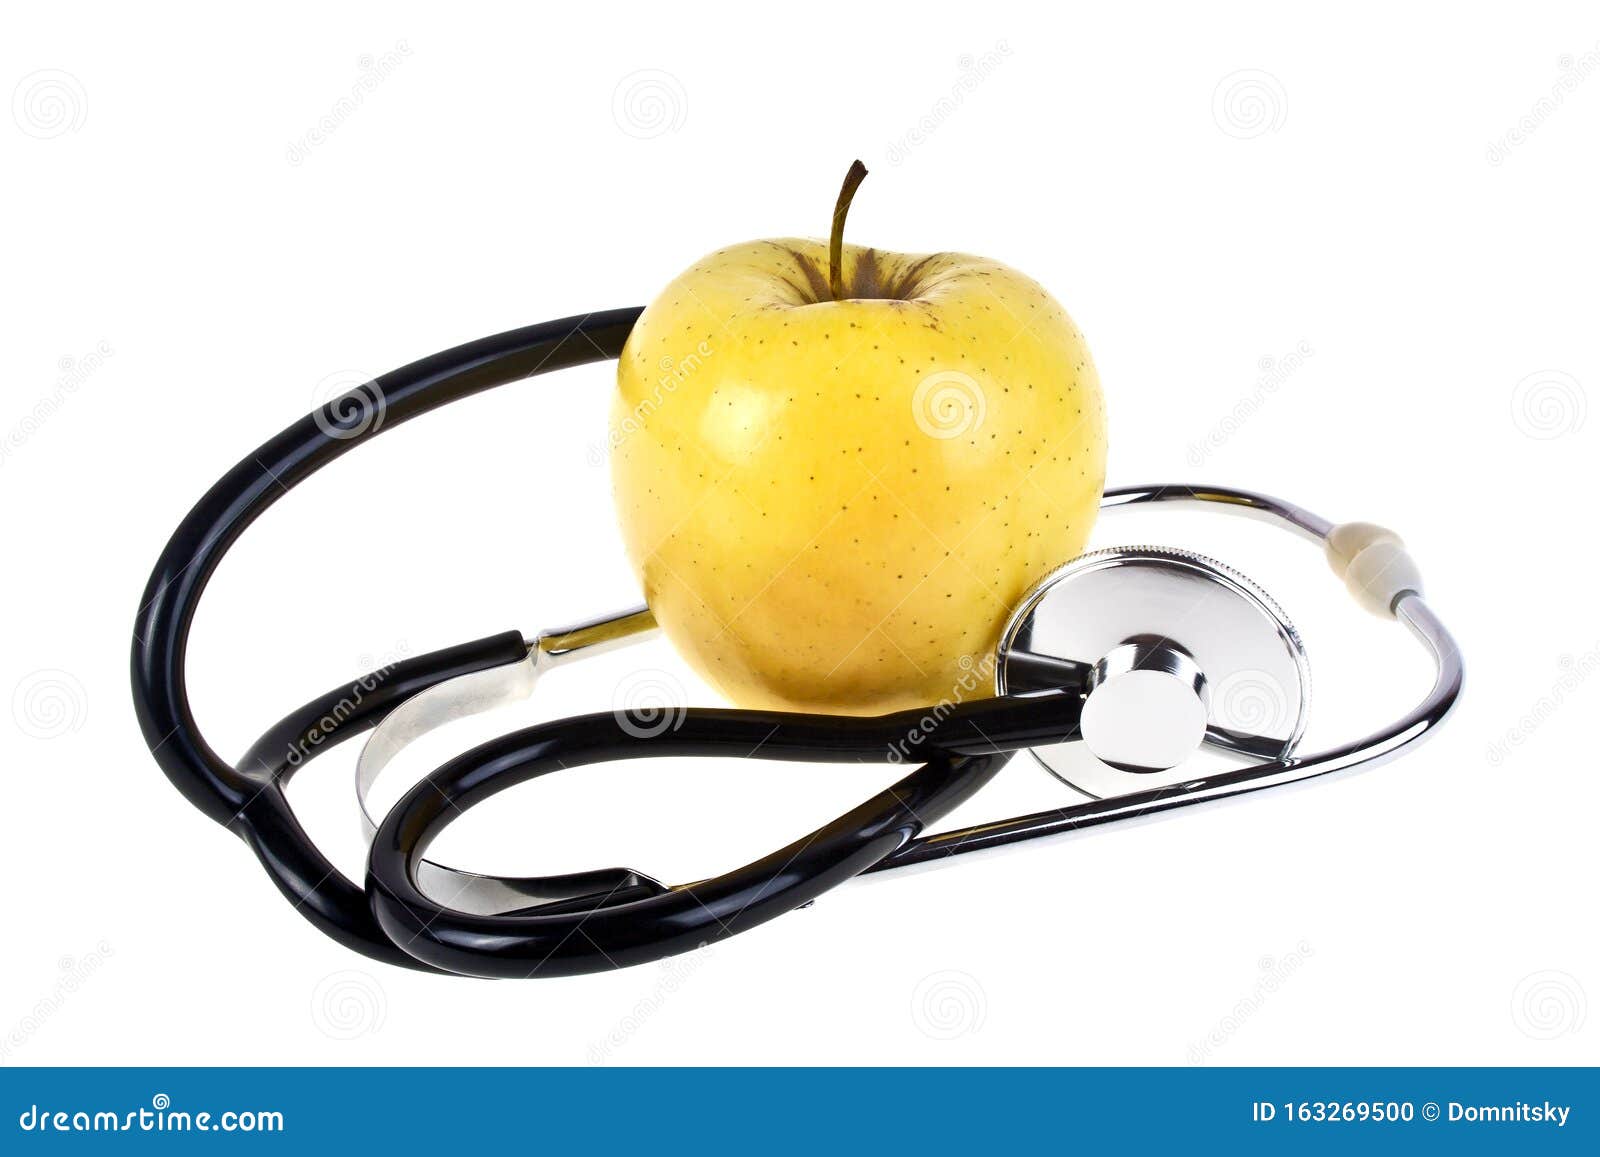 concept for diet and healthcare - yellow apple and stetoskop on a white background